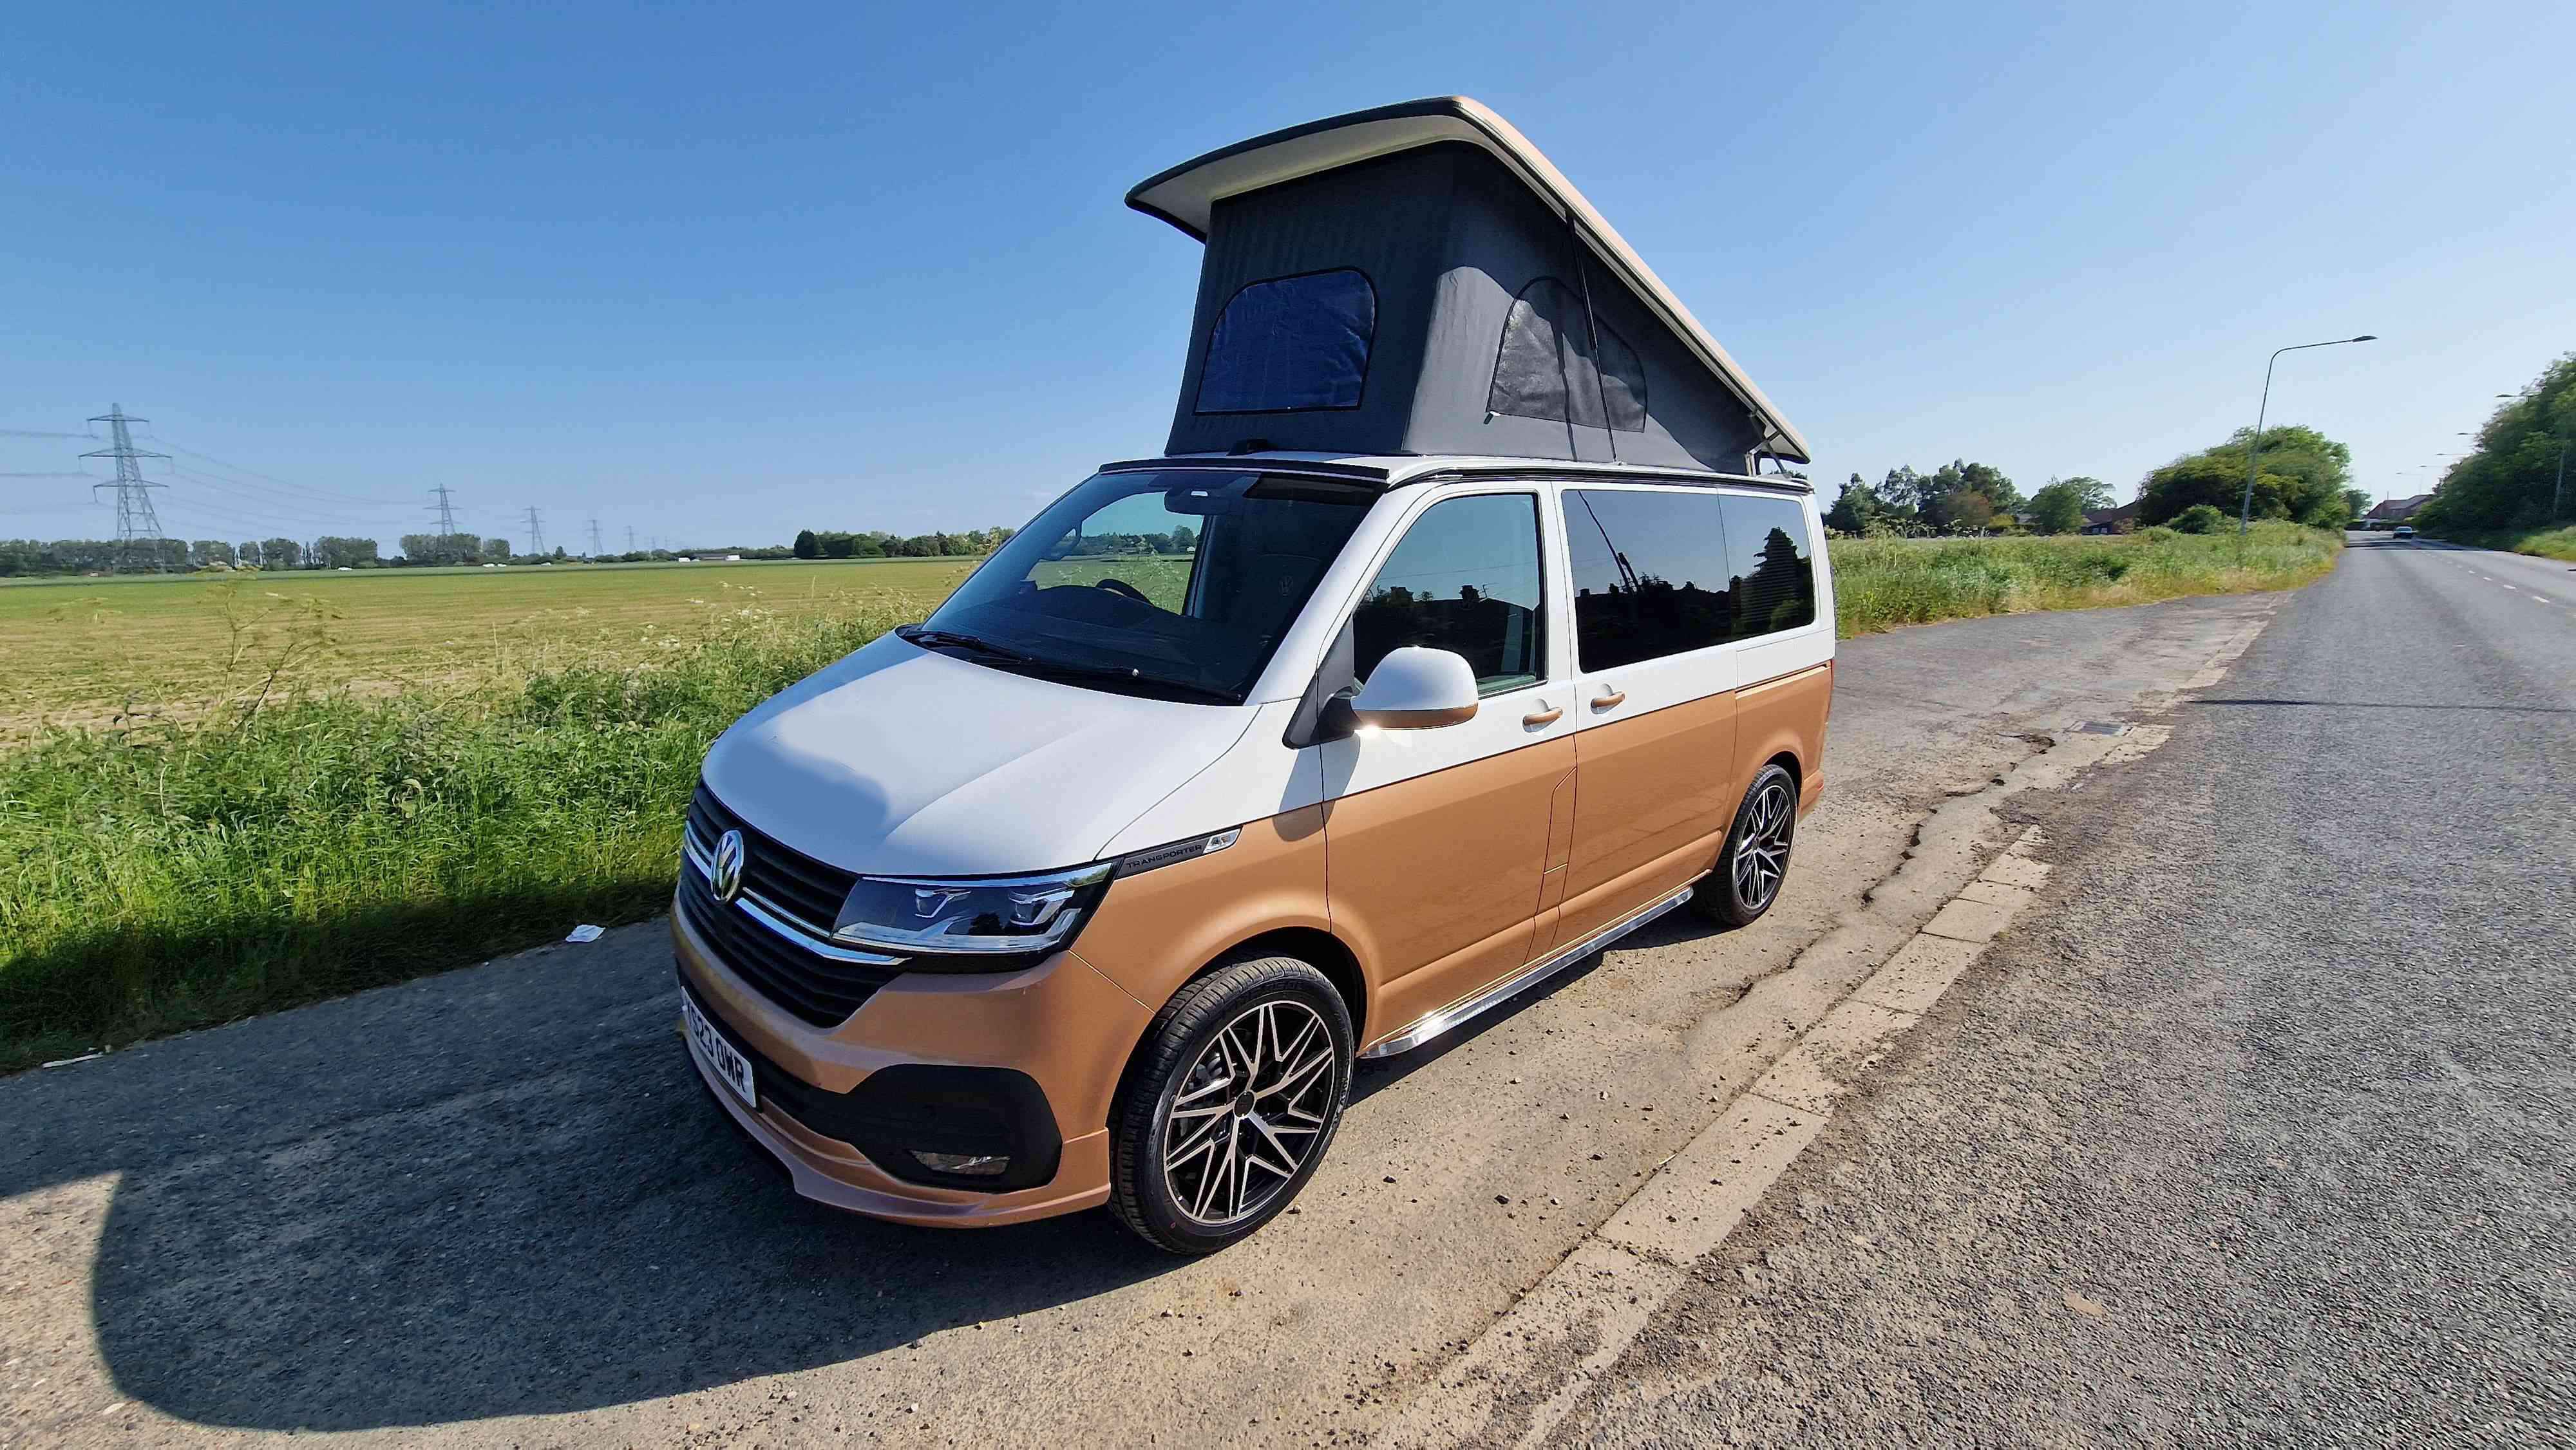 A VW T6 Campervan called Luxury-Bronze and for hire in Walton Highway, England